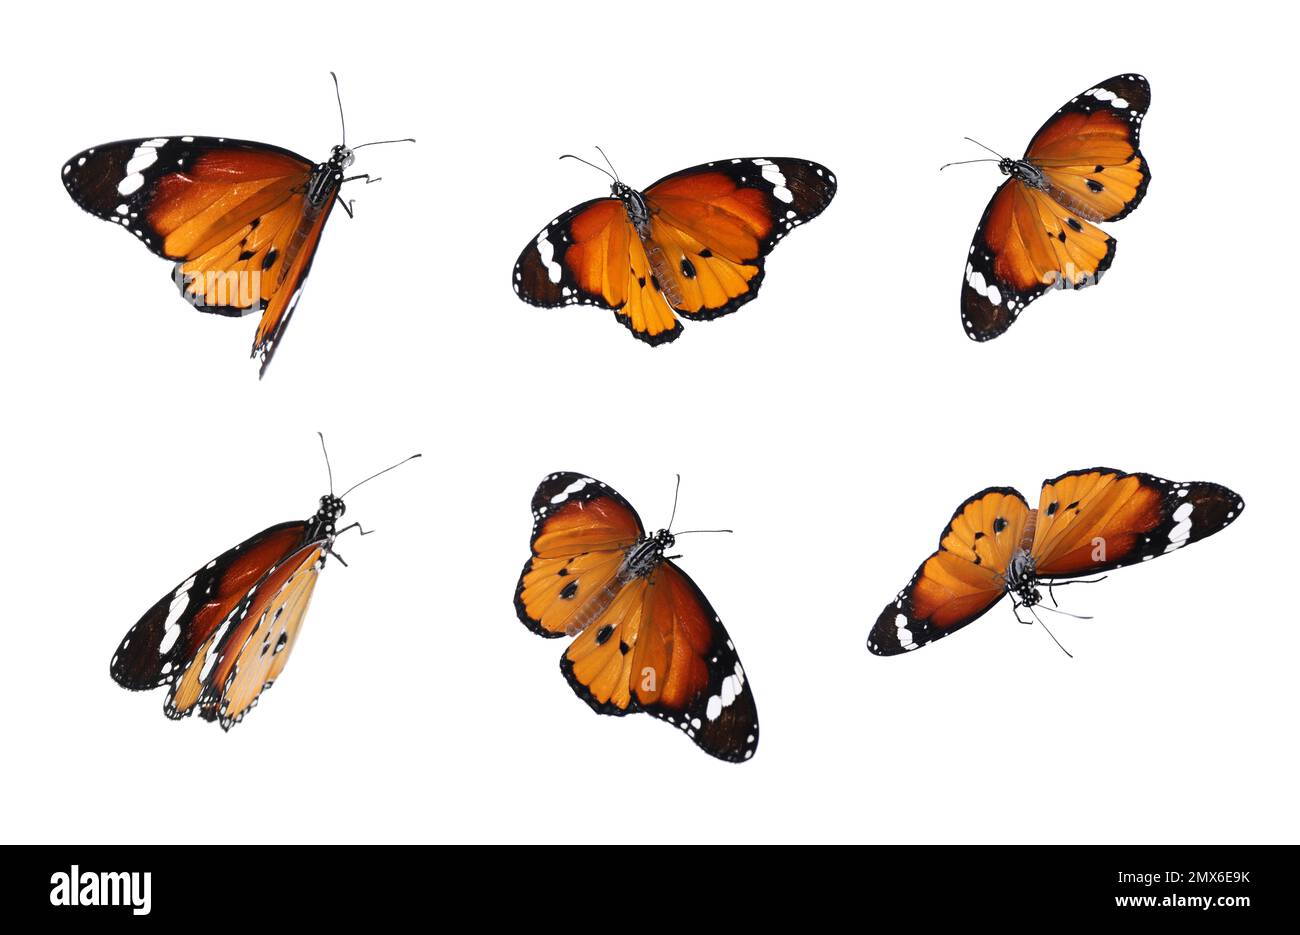 Flying butterflies Cut Out Stock Images & Pictures - Alamy